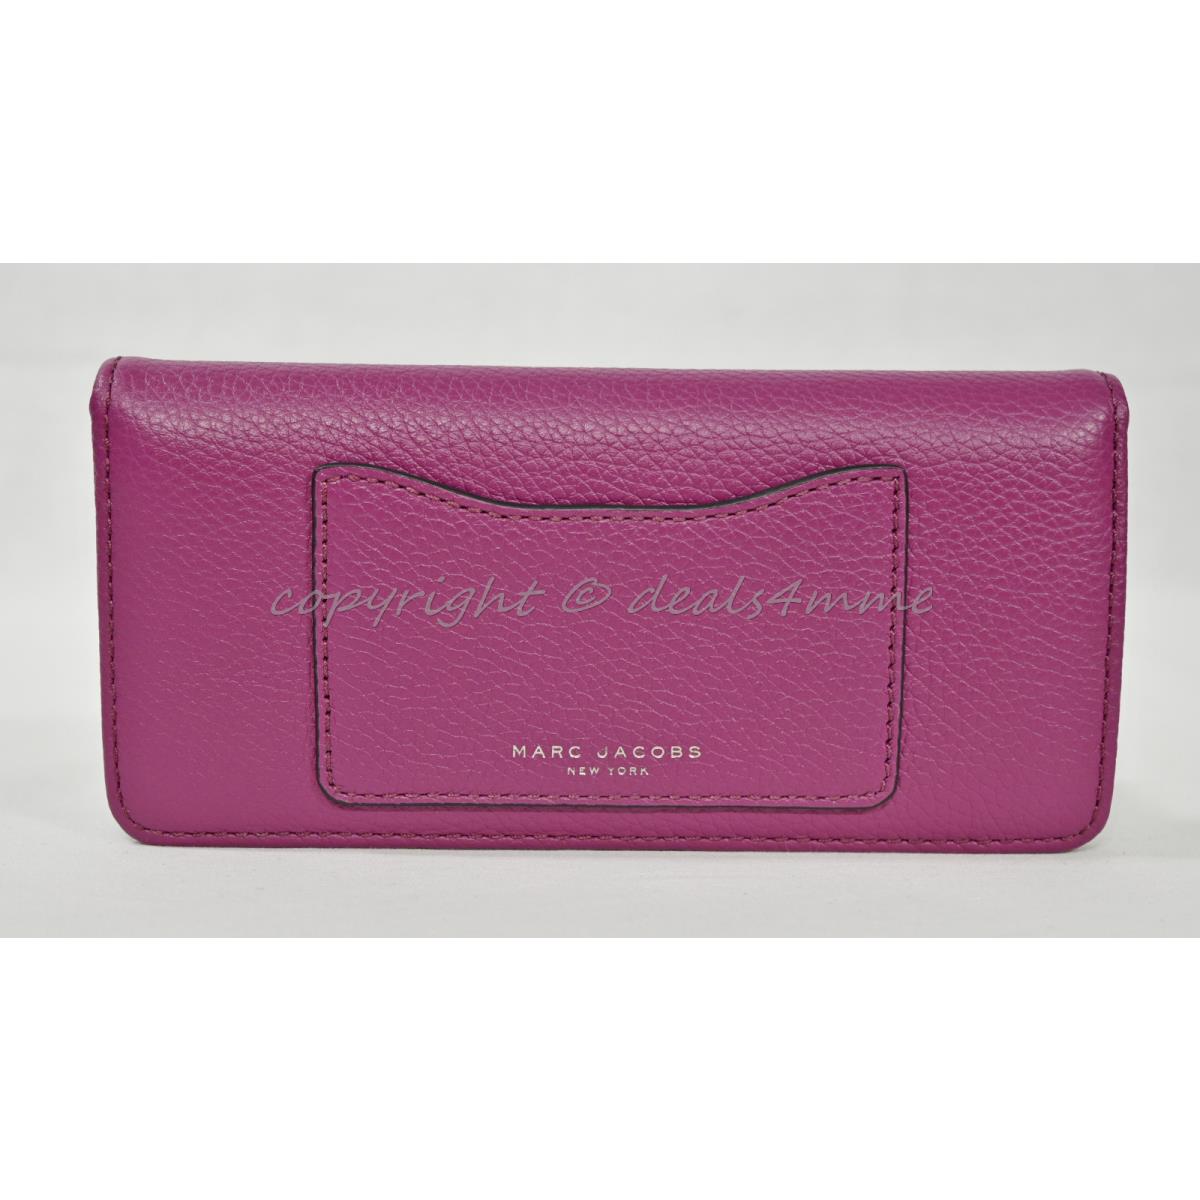 Marc By Marc Jacobs Recruit Small Bauletto Satchel Wallets in Wild Berry M0008170 Recruit Open Face Wallet - Wild Berry